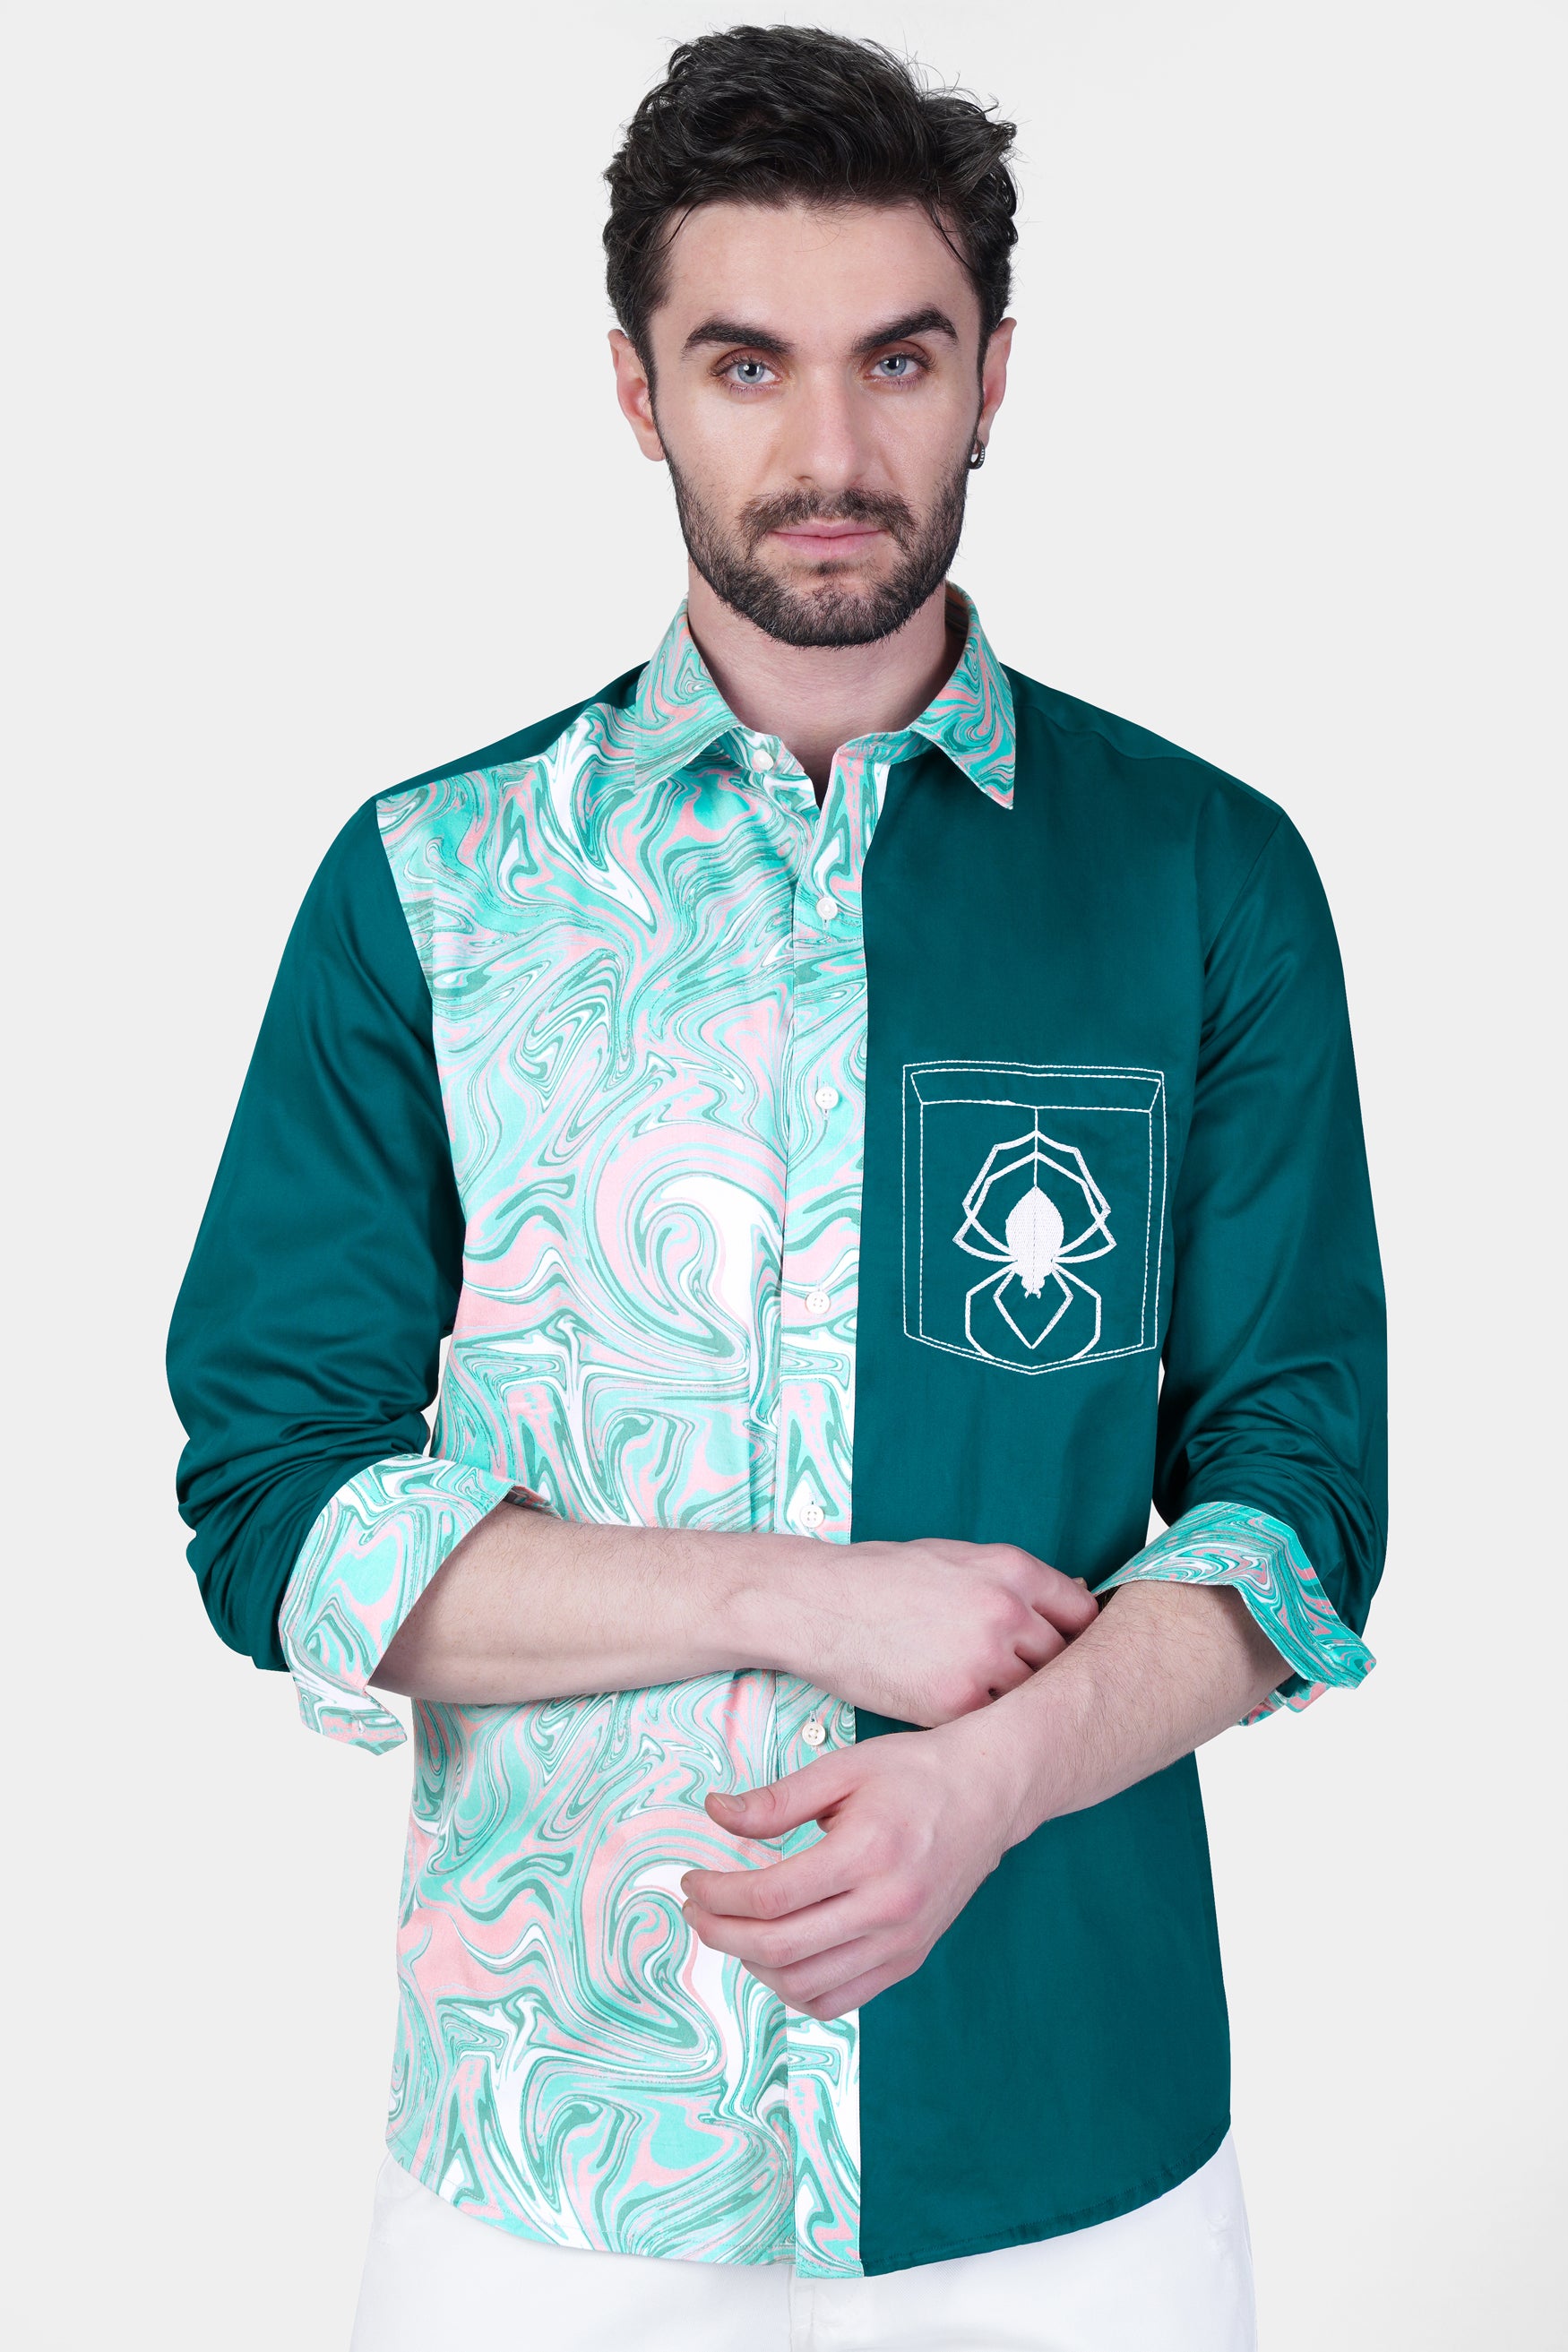 Teal Green Spider and Tiger Embroidered with Blizzard Blue and Cavern Pink Marble Printed Subtle Sheen Super Soft Premium Cotton Designer Shirt 11949-E326-38, 11949-E326-H-38, 11949-E326-39, 11949-E326-H-39, 11949-E326-40, 11949-E326-H-40, 11949-E326-42, 11949-E326-H-42, 11949-E326-44, 11949-E326-H-44, 11949-E326-46, 11949-E326-H-46, 11949-E326-48, 11949-E326-H-48, 11949-E326-50, 11949-E326-H-50, 11949-E326-52, 11949-E326-H-52